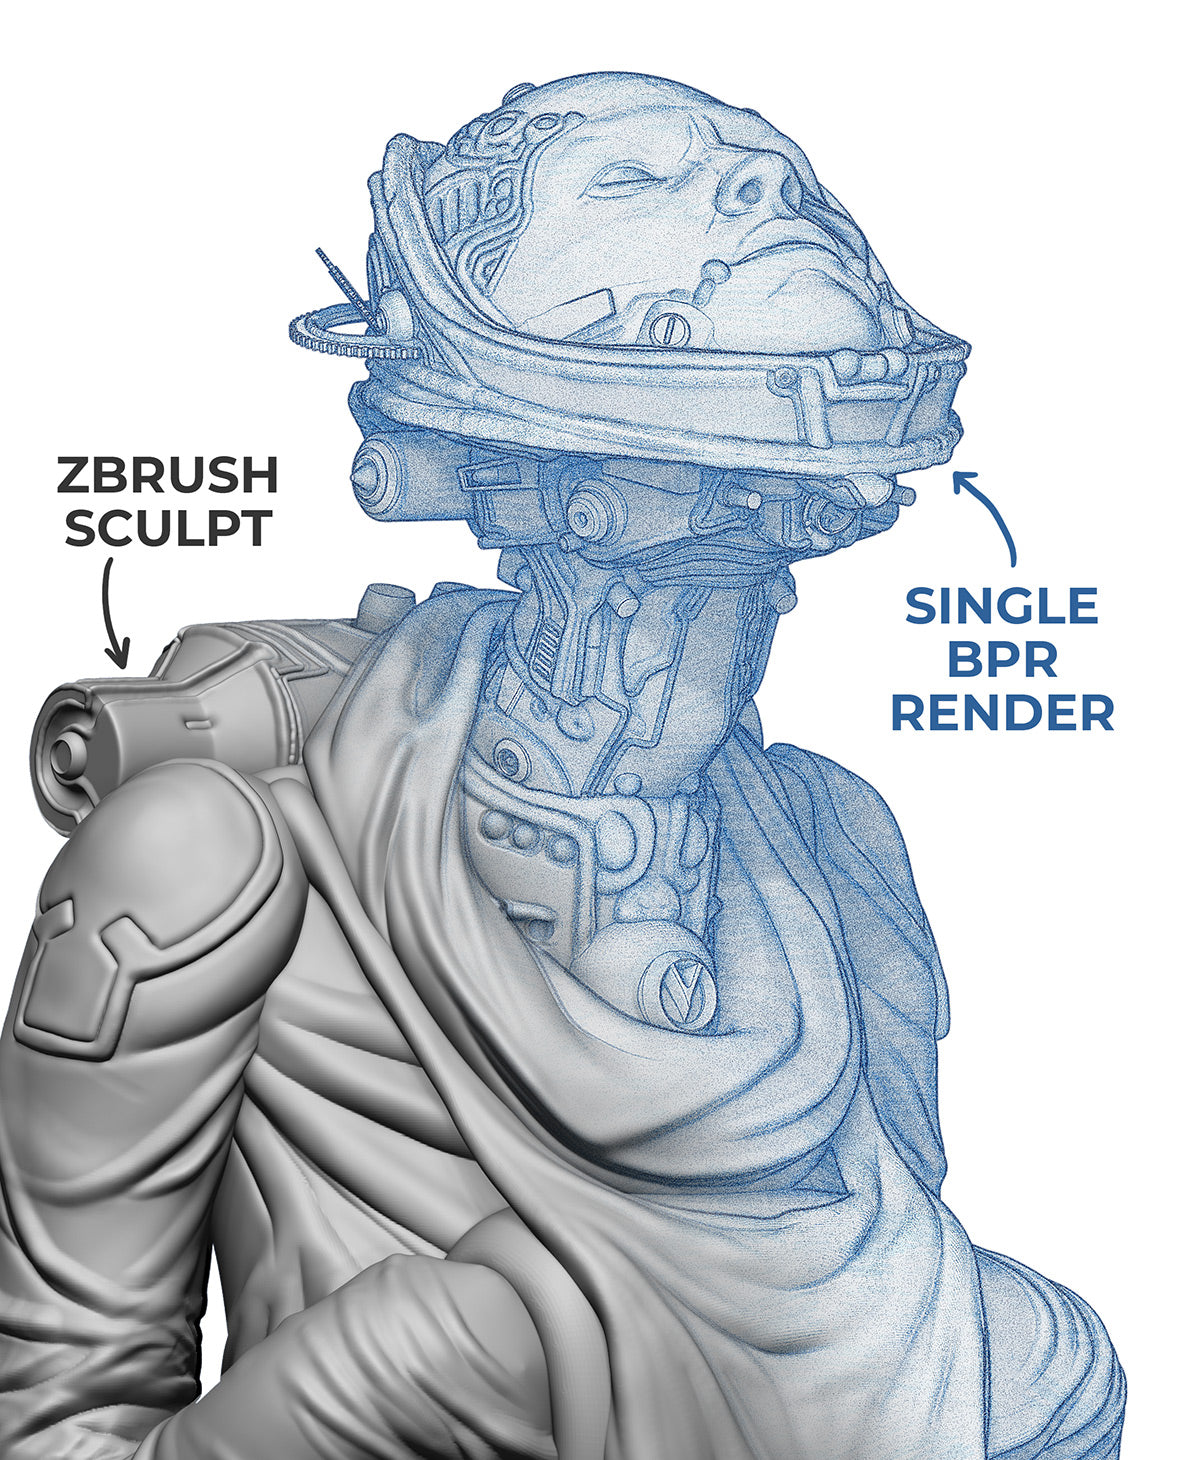 2D Sketches from 3D Meshes - ZBrush BPR filters pack